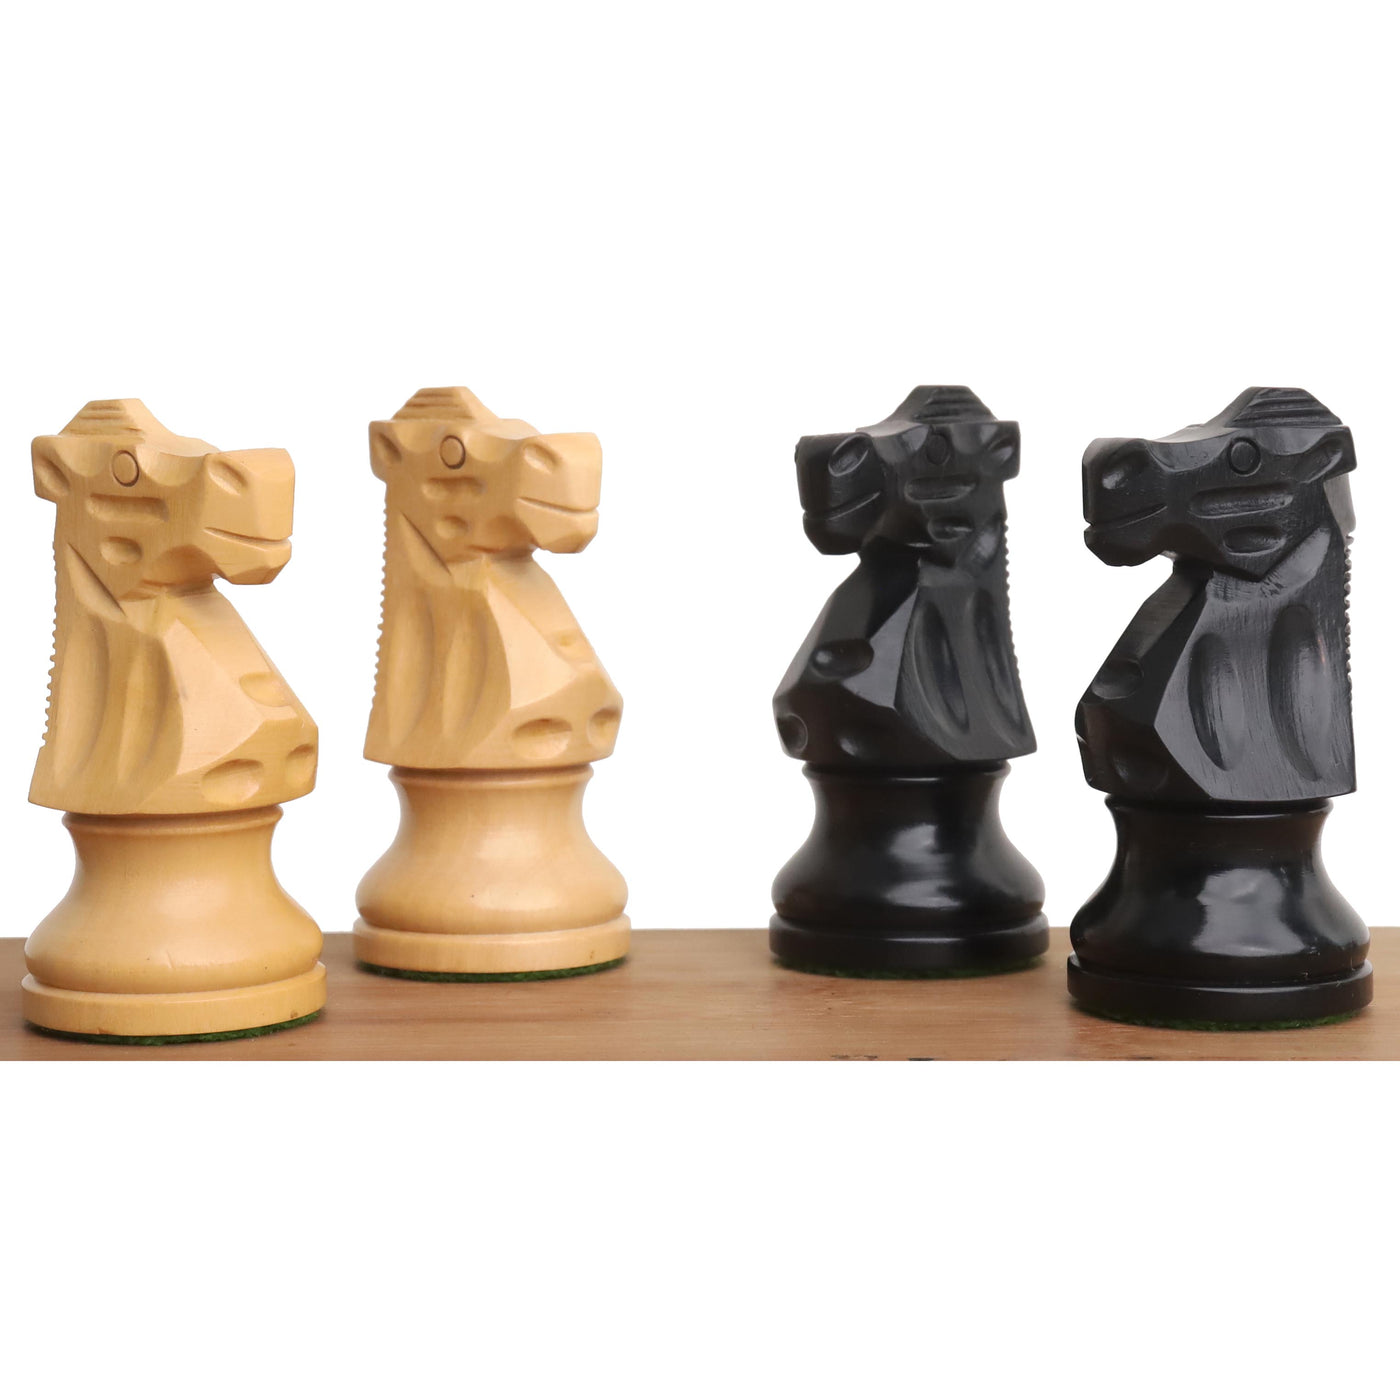 Reproduced French Lardy Staunton Chess Pieces set - Weighted Wood - 4 Queens